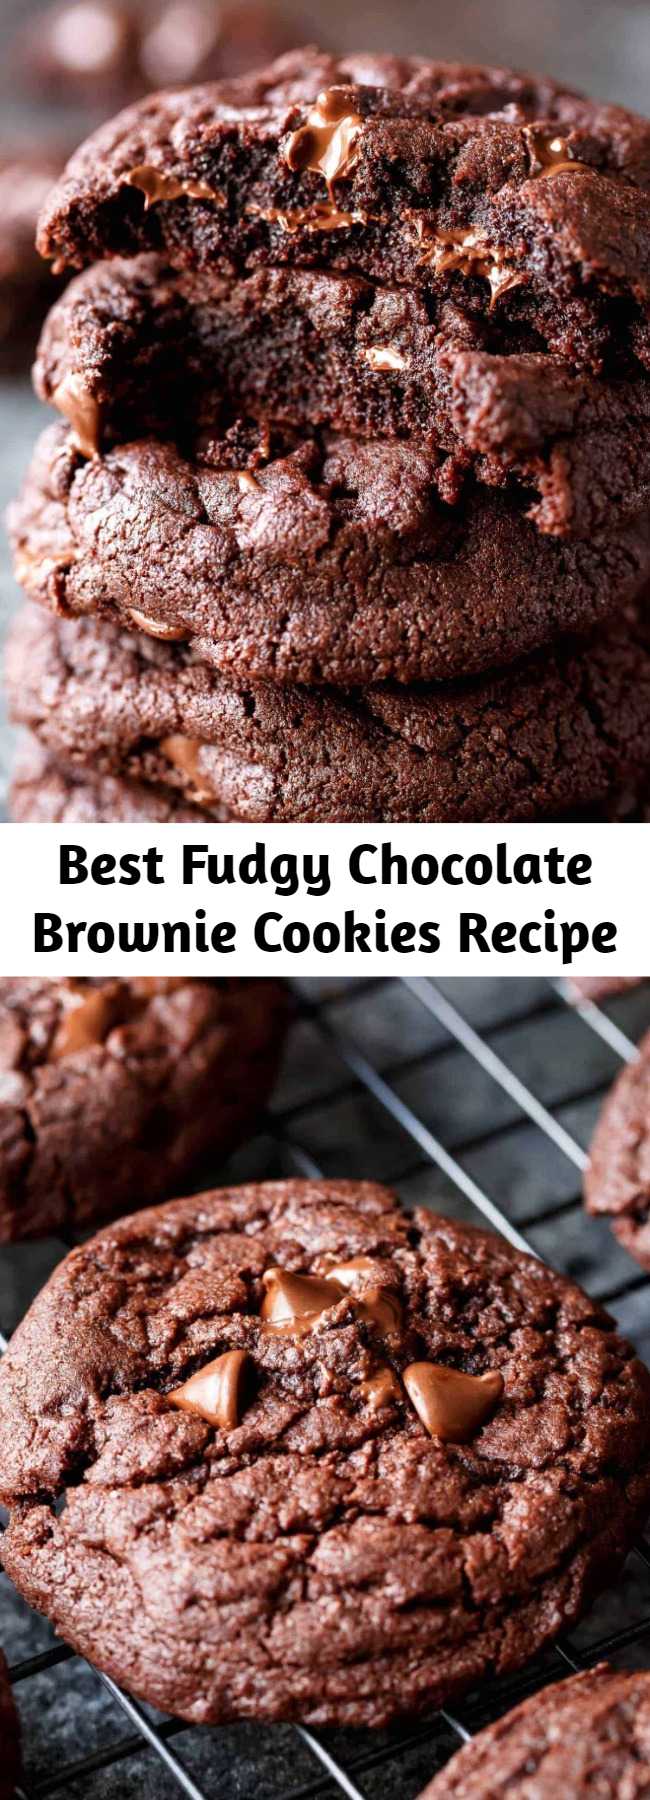 Best Fudgy Chocolate Brownie Cookies Recipe - Best Fudgy Chocolate Brownie Cookies are a one bowl wonder ready in minutes, and named better than a brownie cookie! They disappear in seconds!